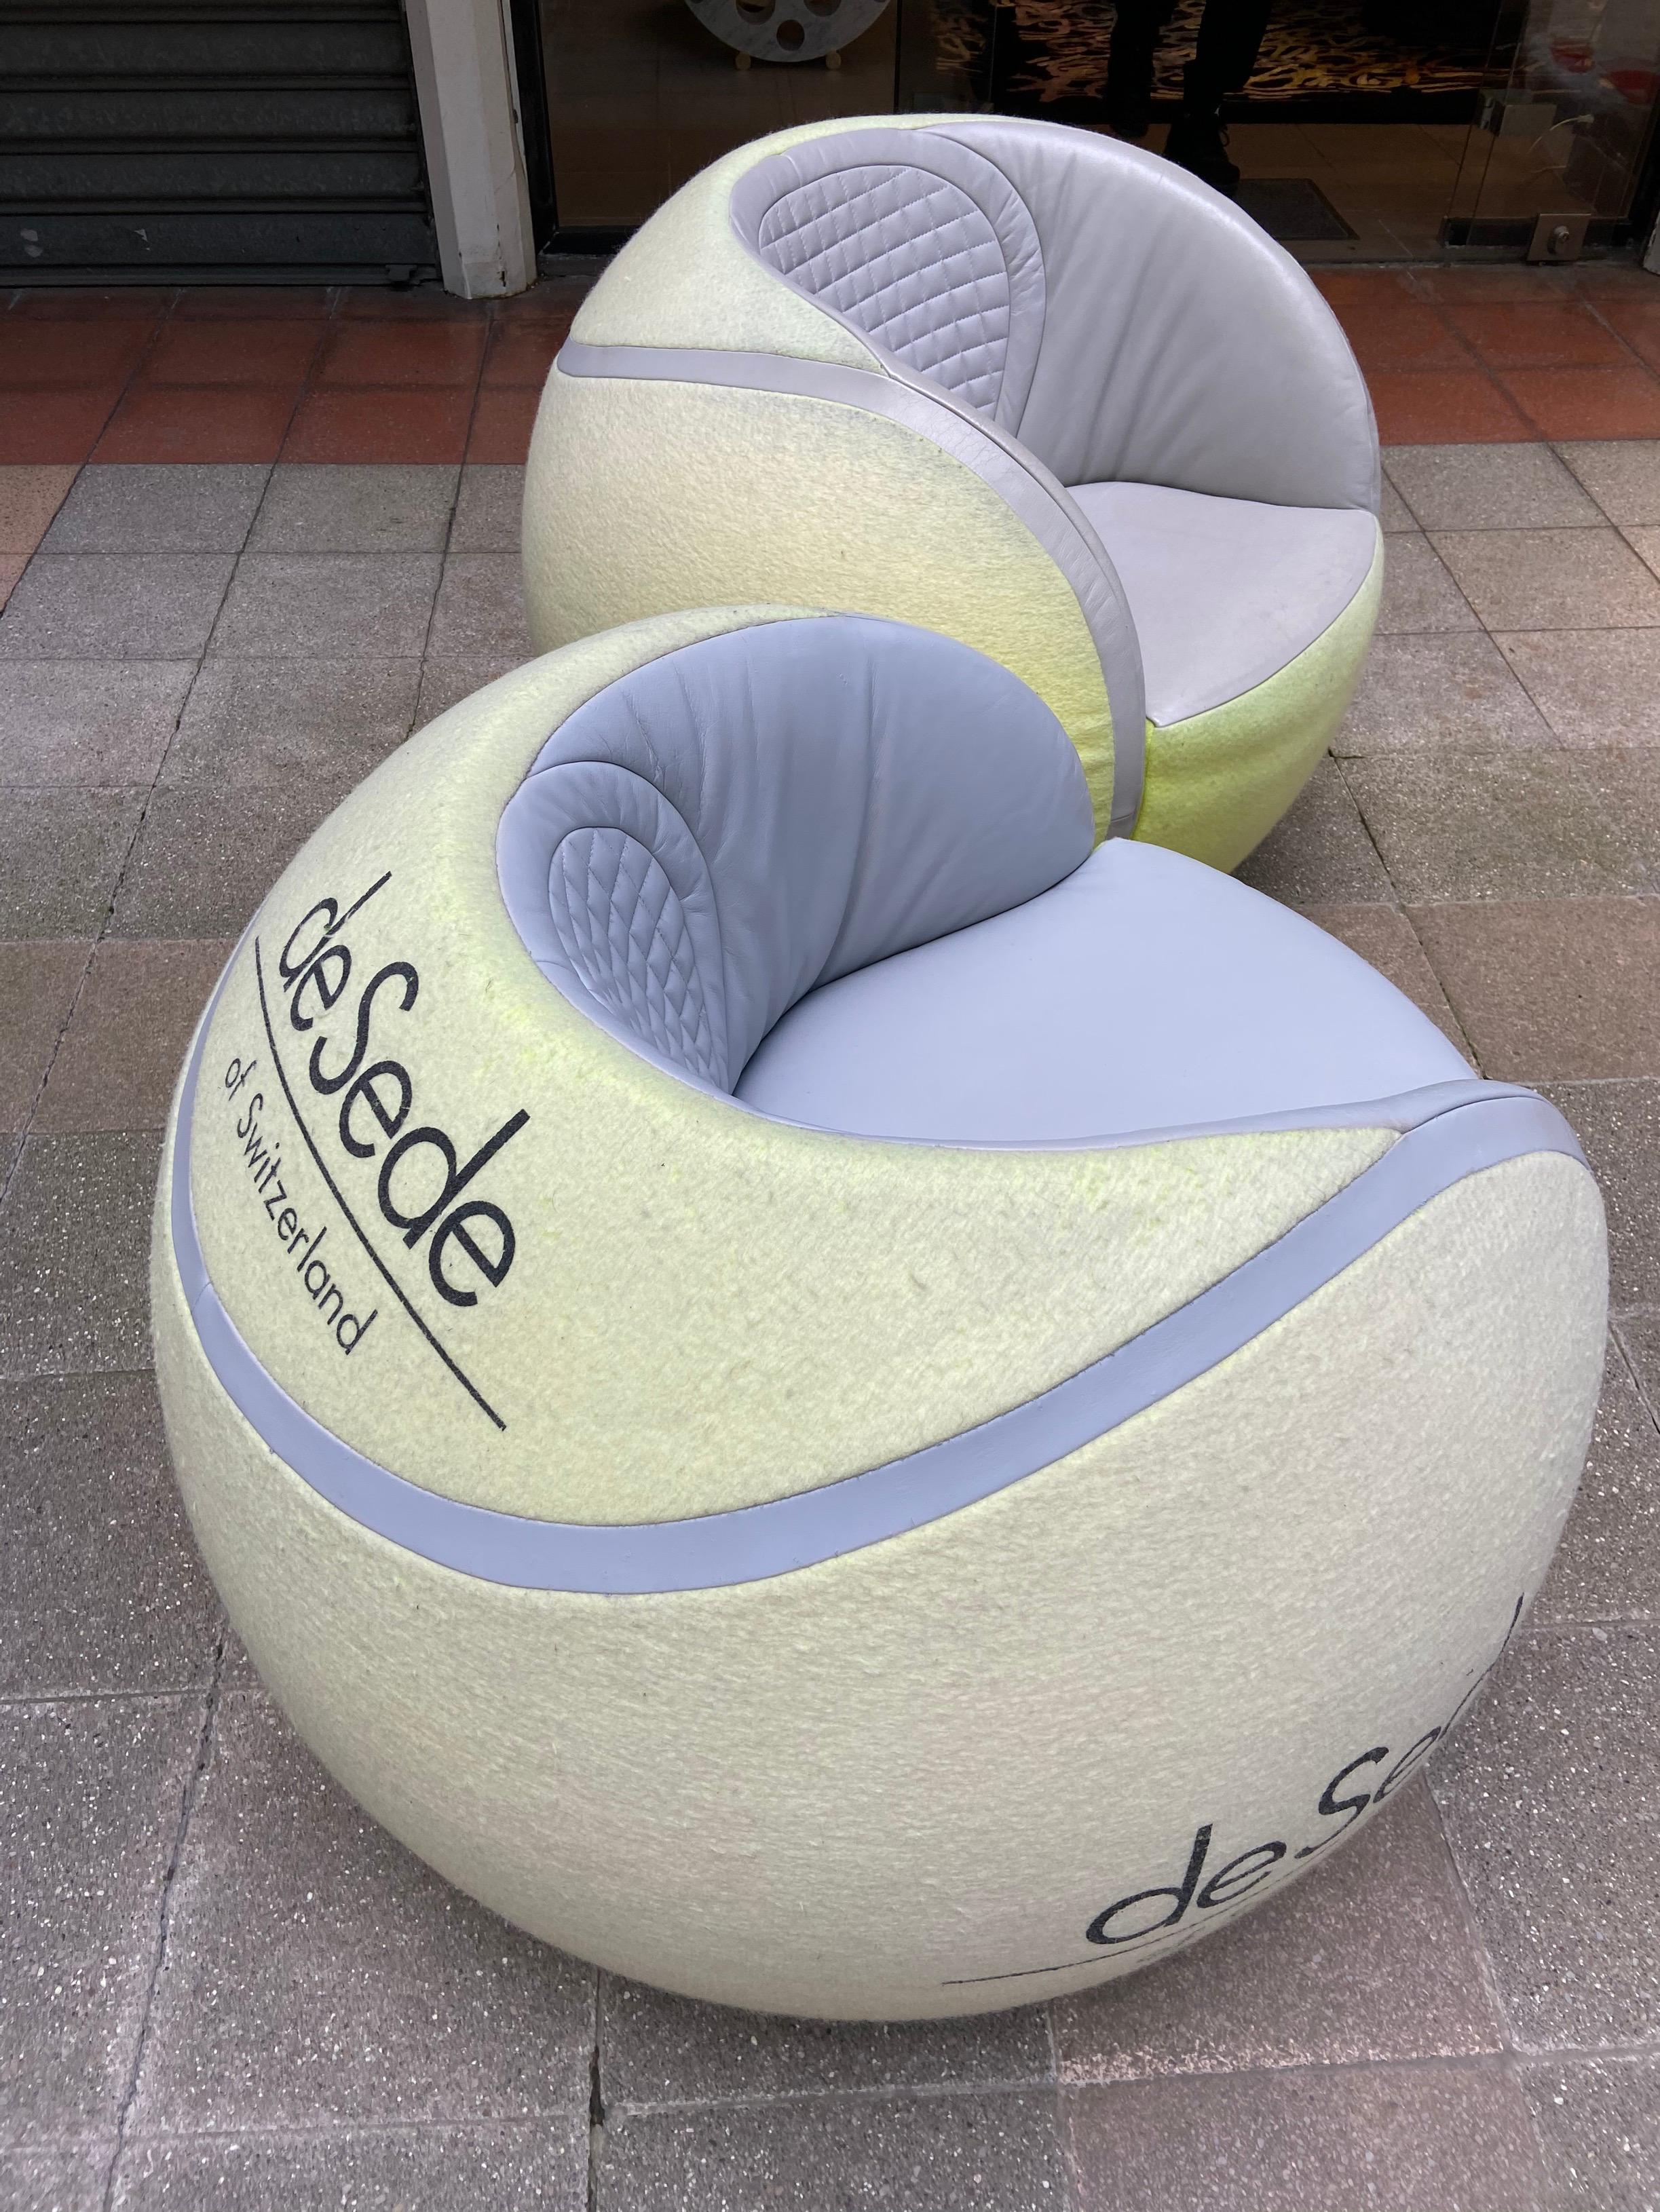 De Sede - Pair of tennis ball swivel armchairs - 1985 

For the WTA Zurich Open

Yellow felt and gray leather

Foot with rotating disc

D 88 x H 73 cm 

H seat: 47cm

Good condition.

 